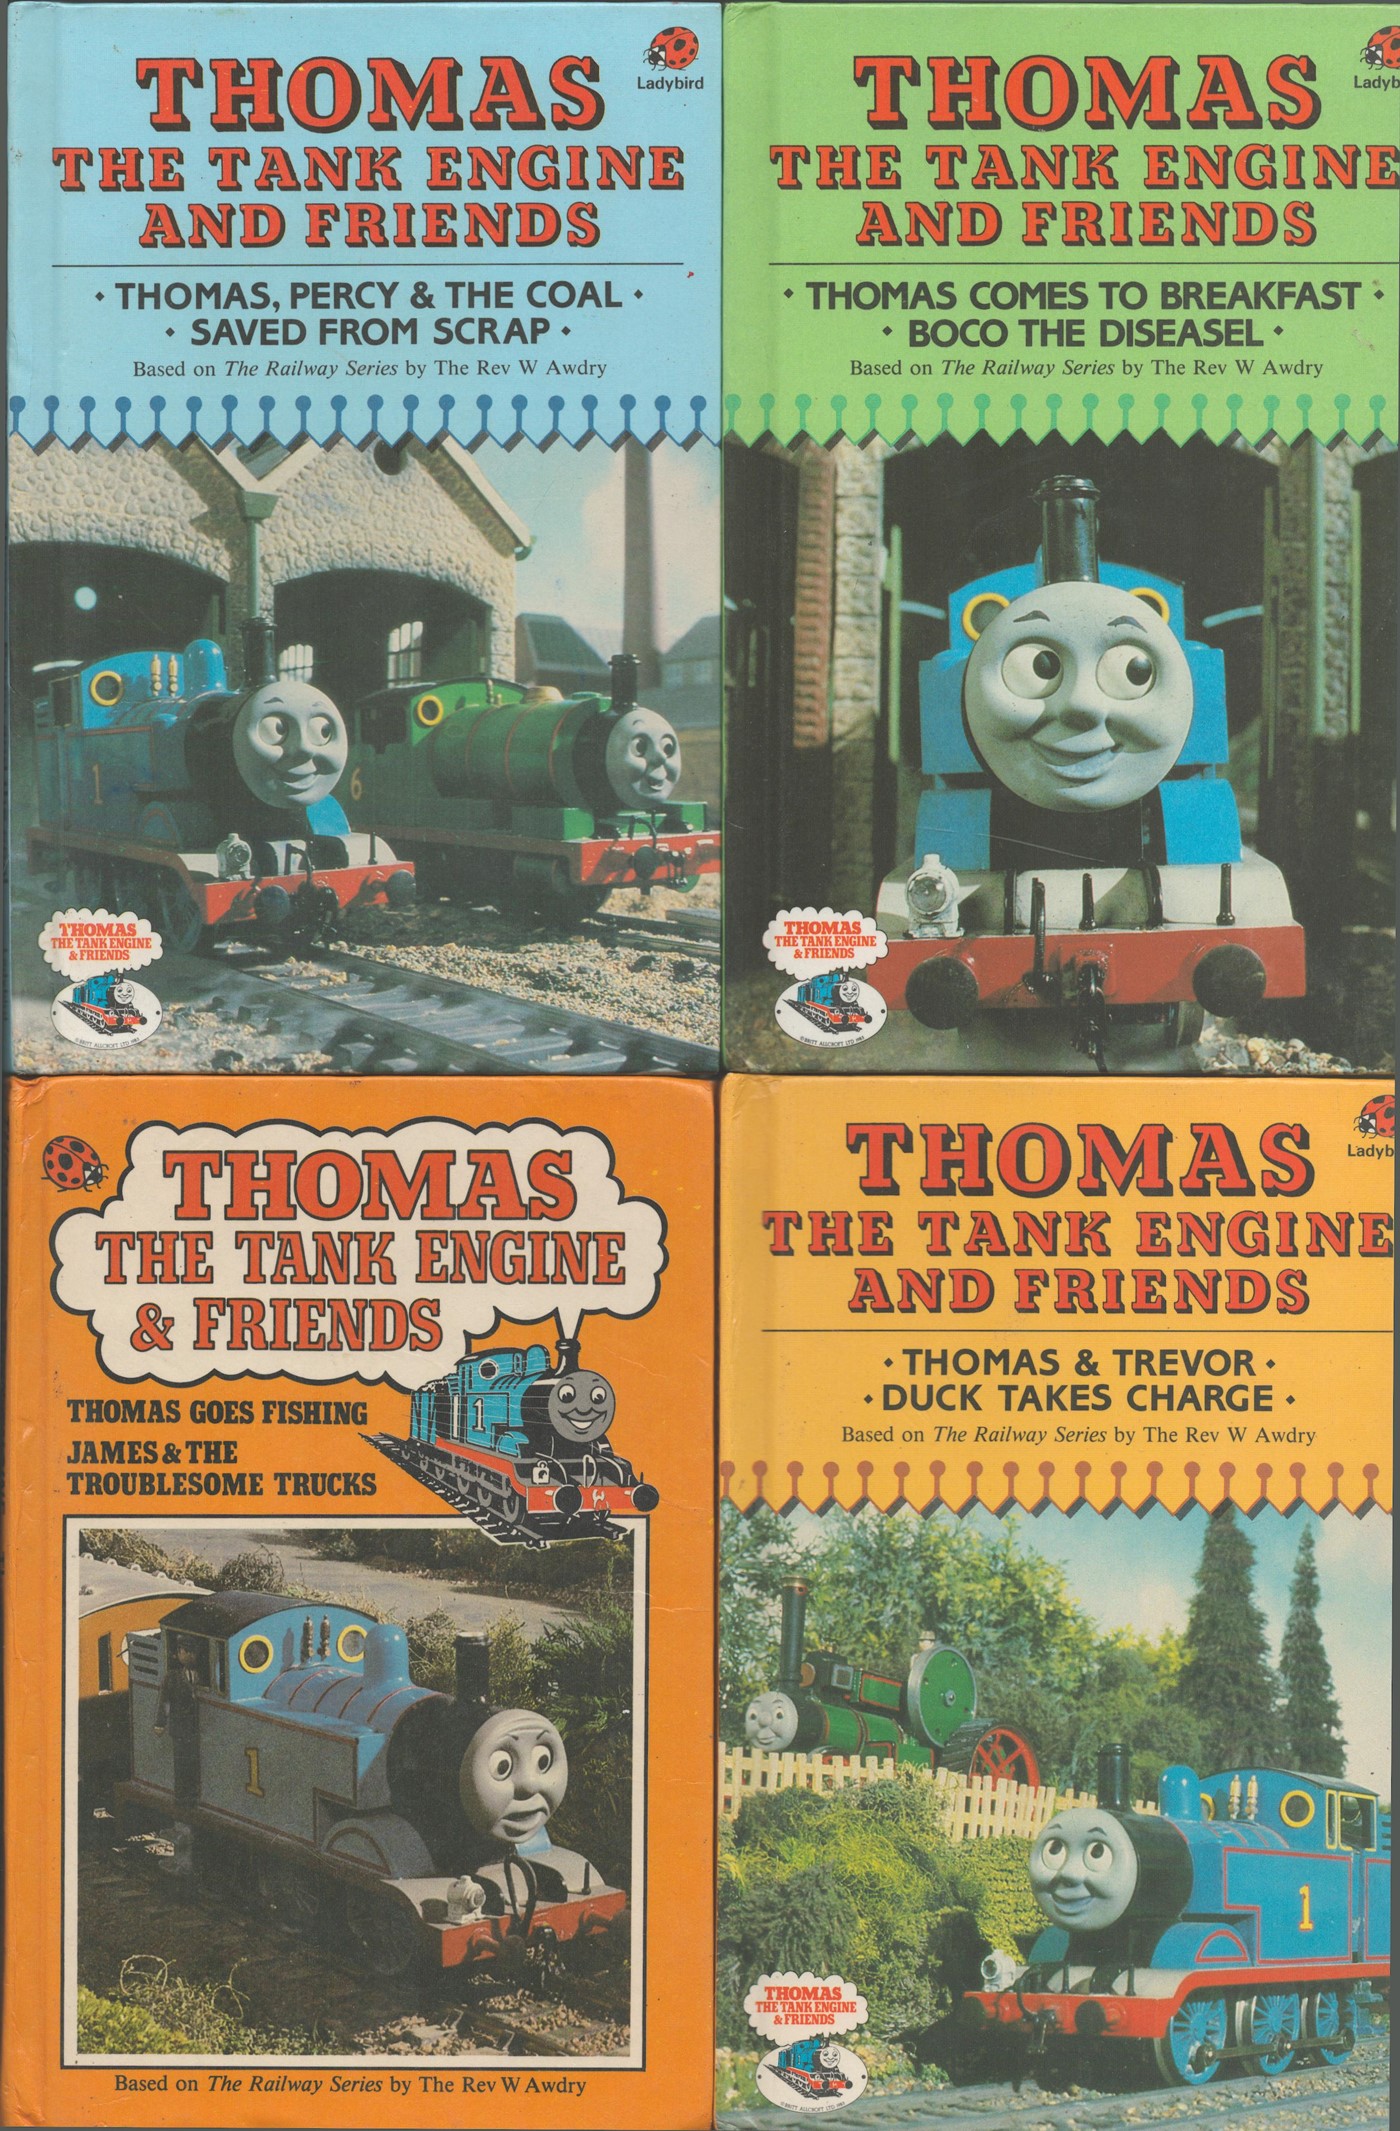 Thomas The Tank Engine and Friends vintage Ladybird book collection featuring 7 hardback books